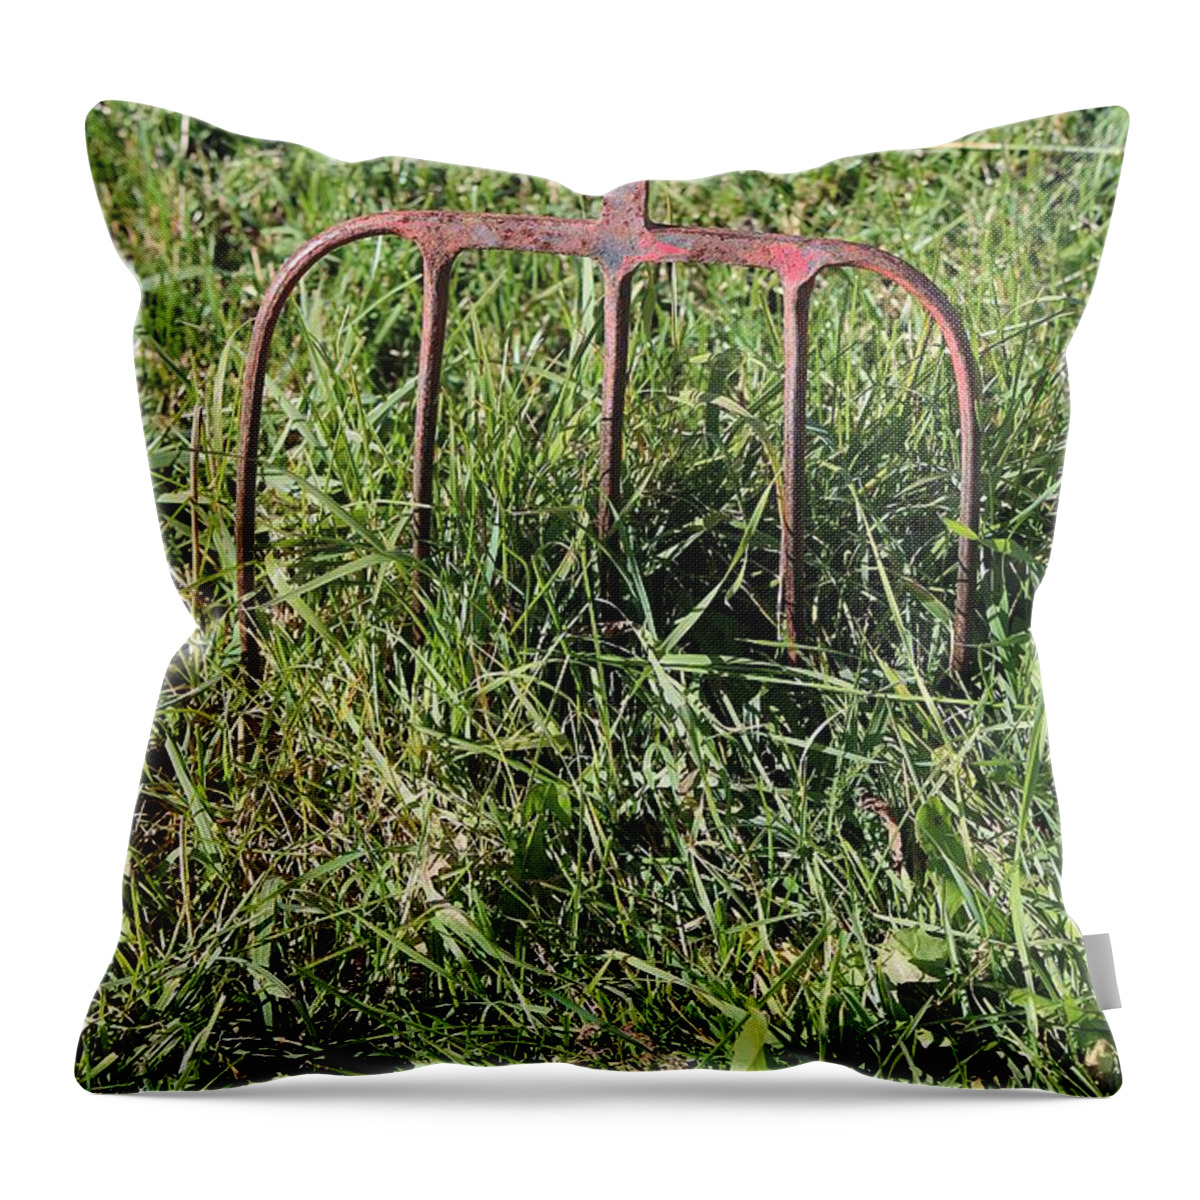 Pitch Fork Throw Pillow featuring the photograph Old Pitch Fork by Ann E Robson